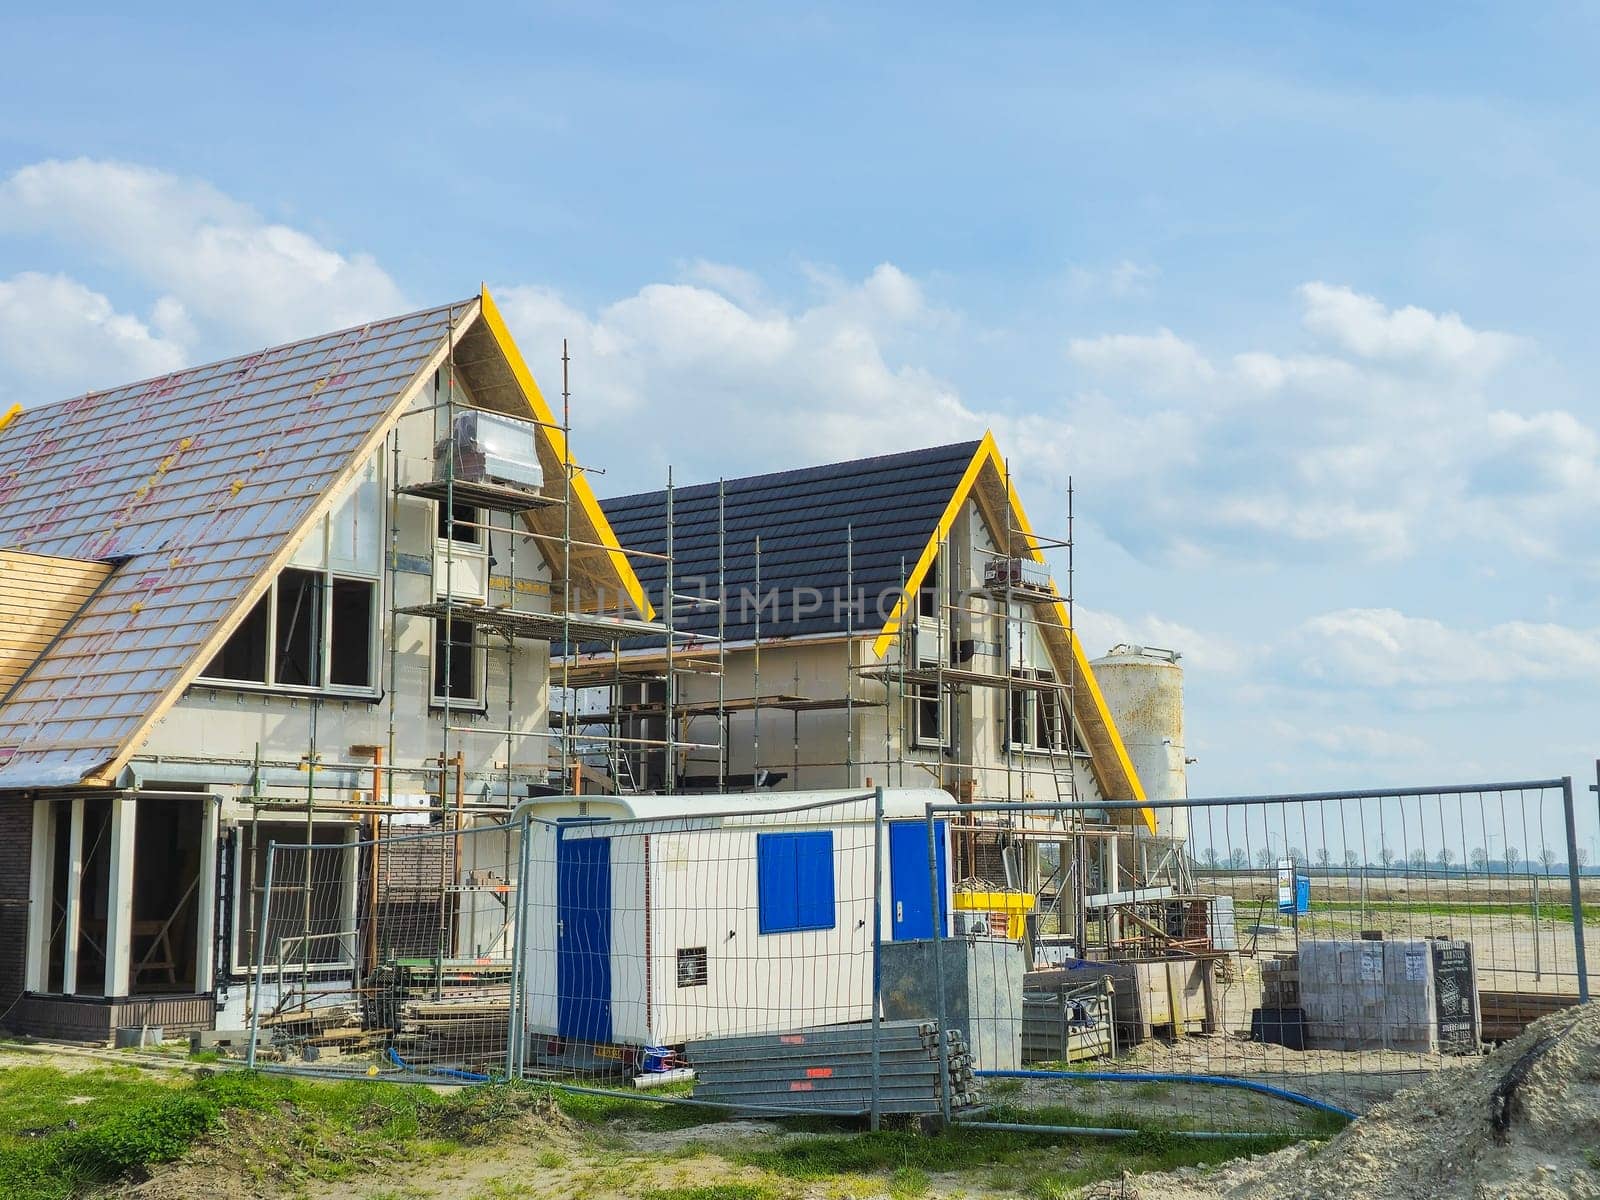 construction site of a new Dutch Suburban area with modern family houses, newly built modern family homes in the Netherlands during construction